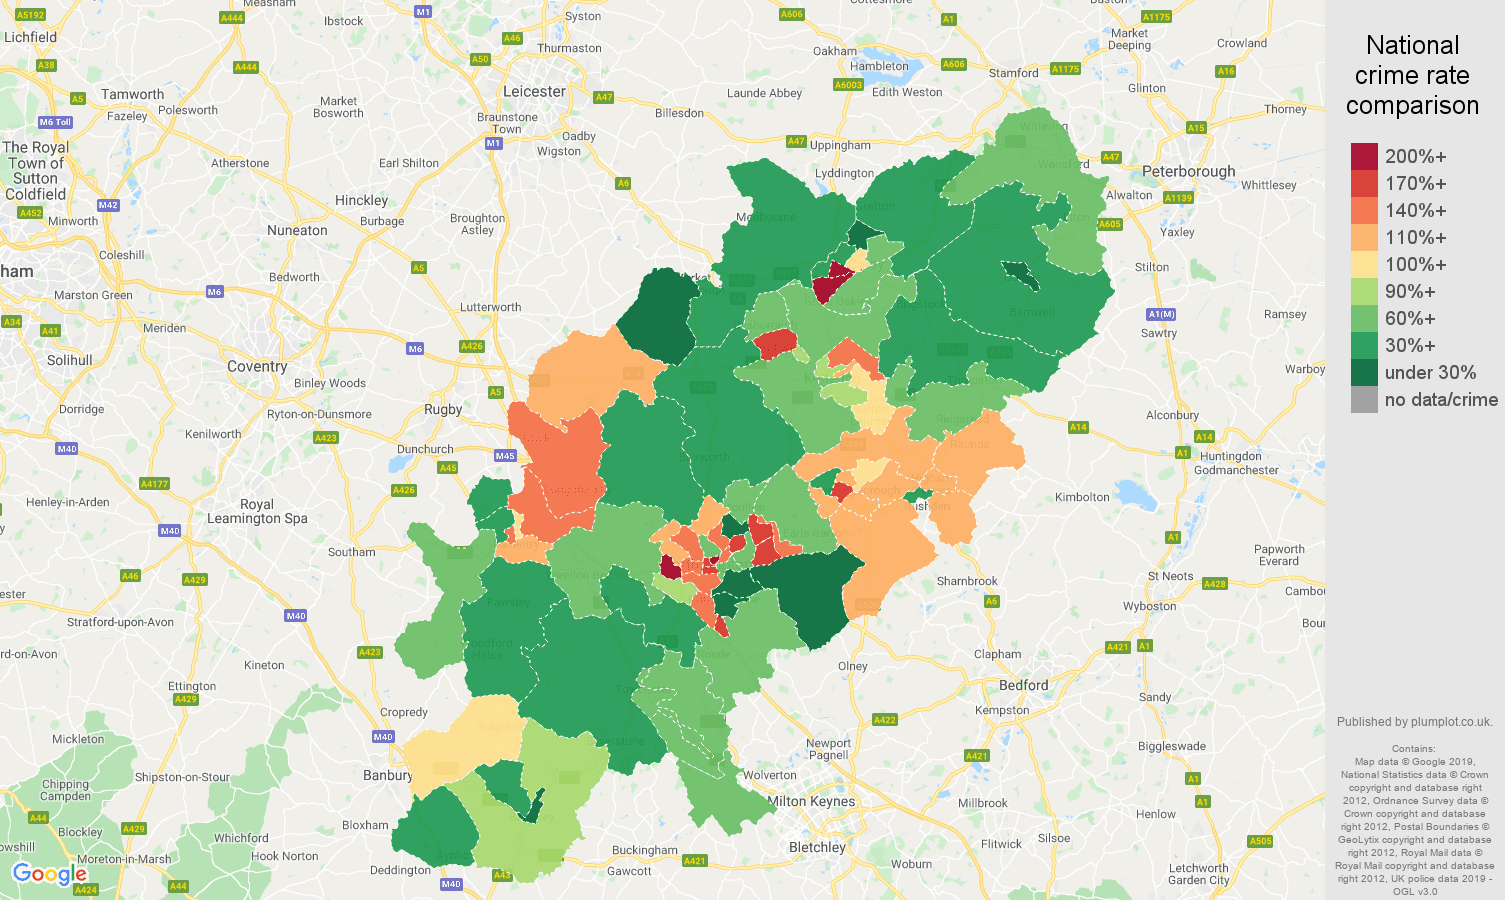 Northamptonshire other crime rate comparison map